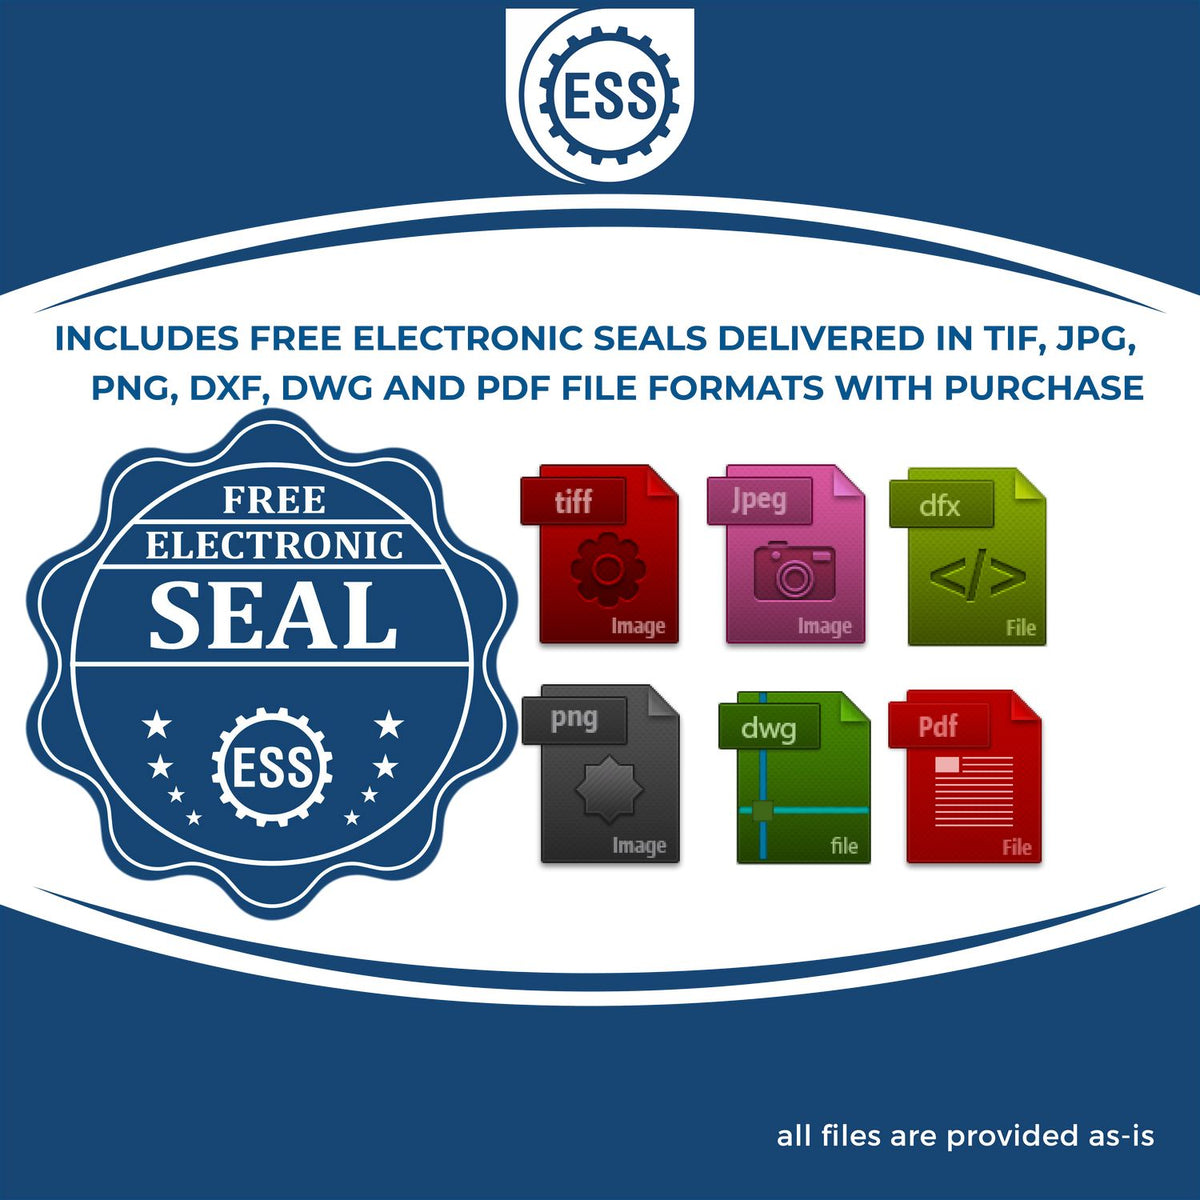 An infographic for the free electronic seal for the Slim Pre-Inked State Seal Notary Stamp for New York illustrating the different file type icons such as DXF, DWG, TIF, JPG and PNG.